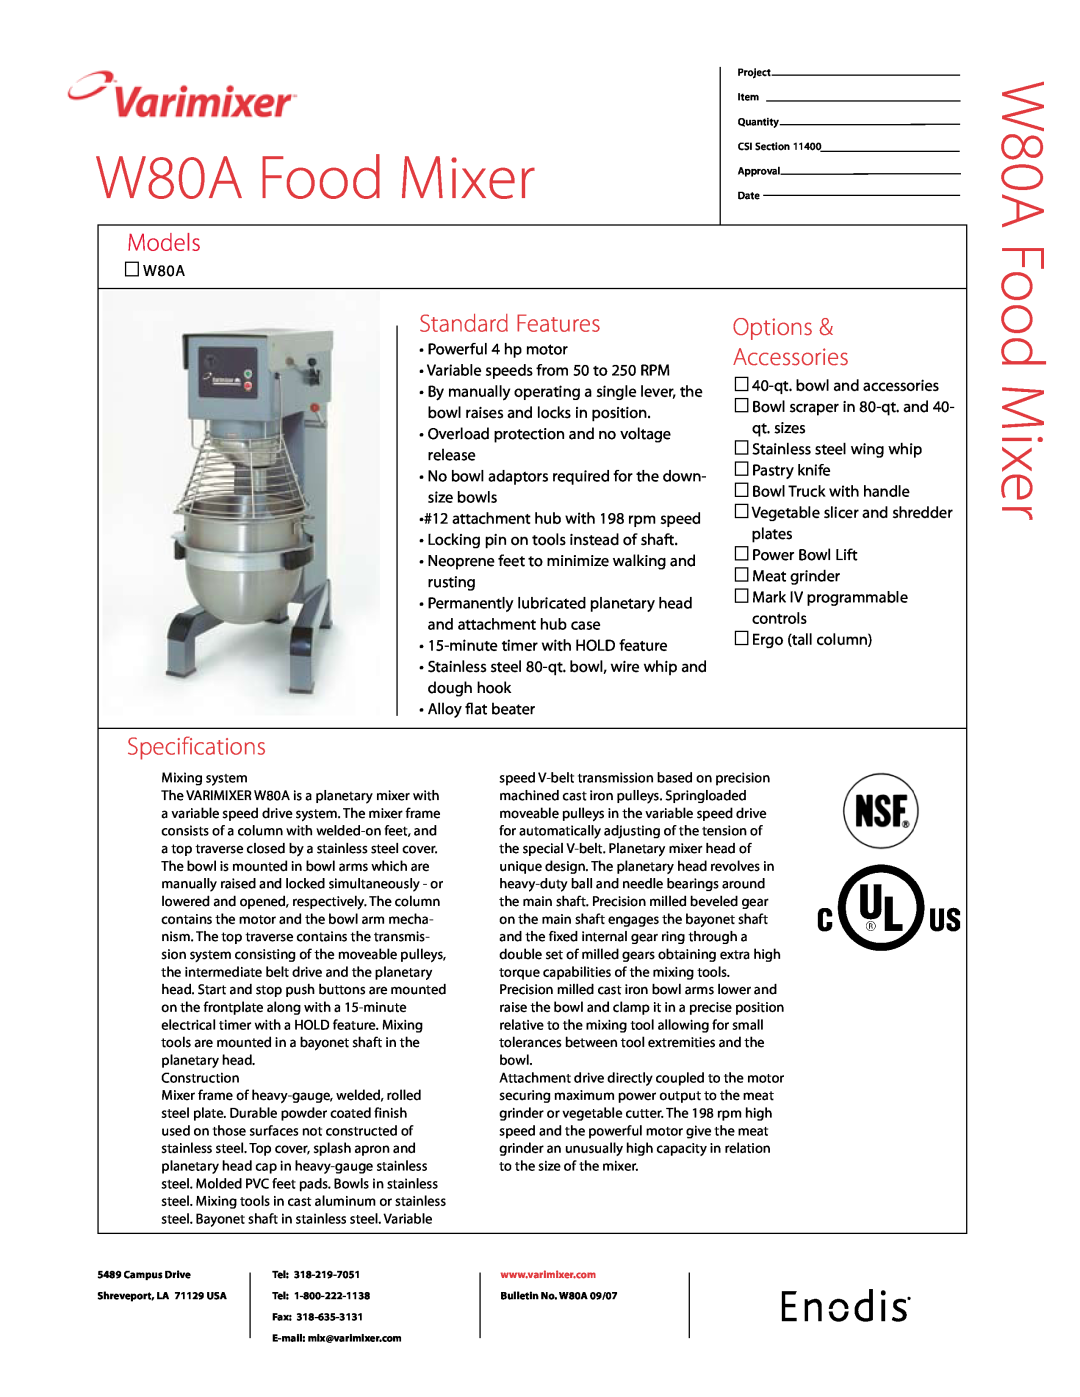 Varimixer specifications W80A Food Mixer, Standard Features, Options, Accessories, Models, Specifications 